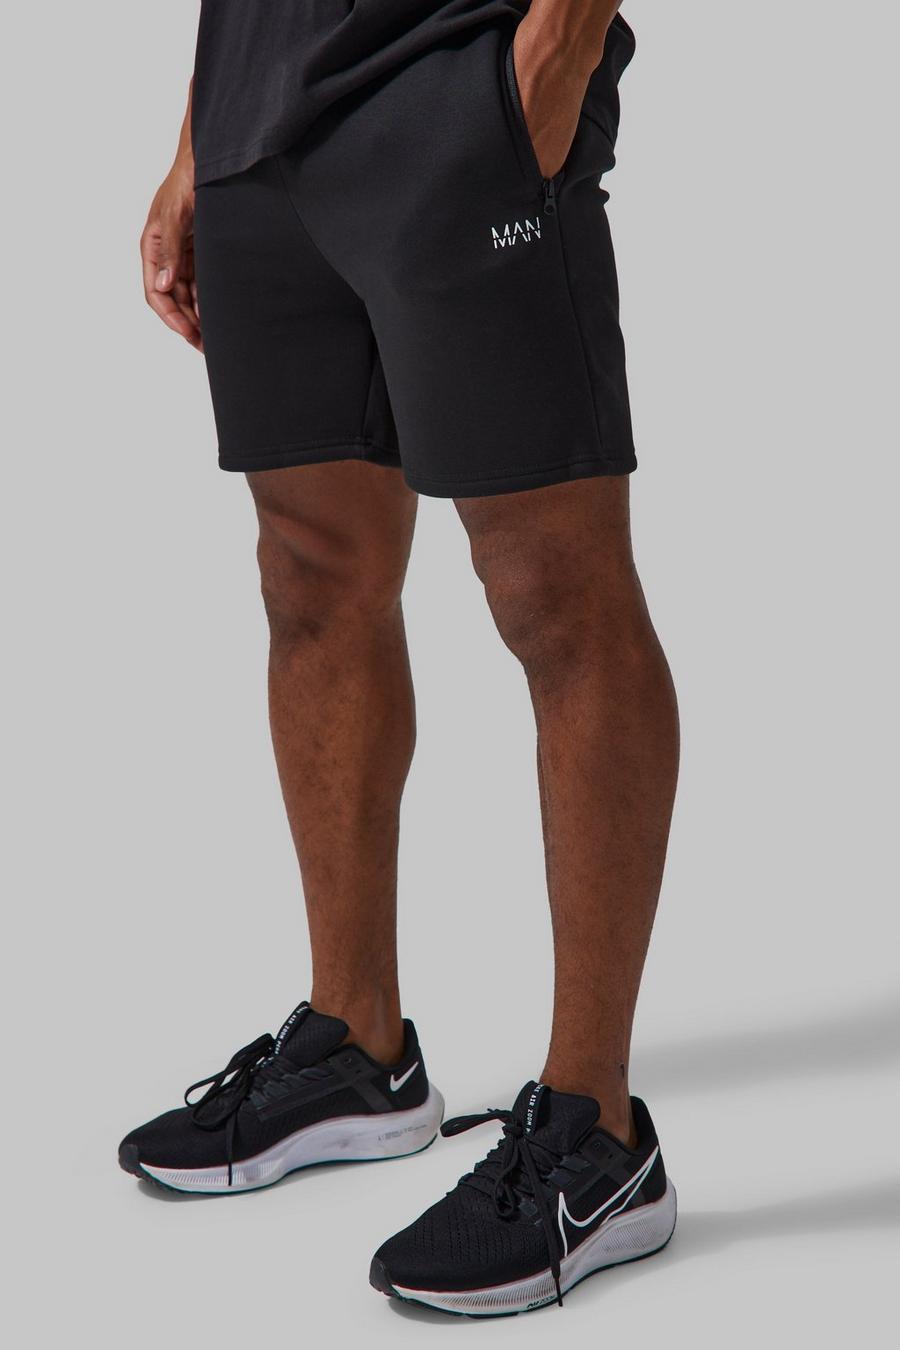 Man Active Muscle-Fit Shorts, Black image number 1